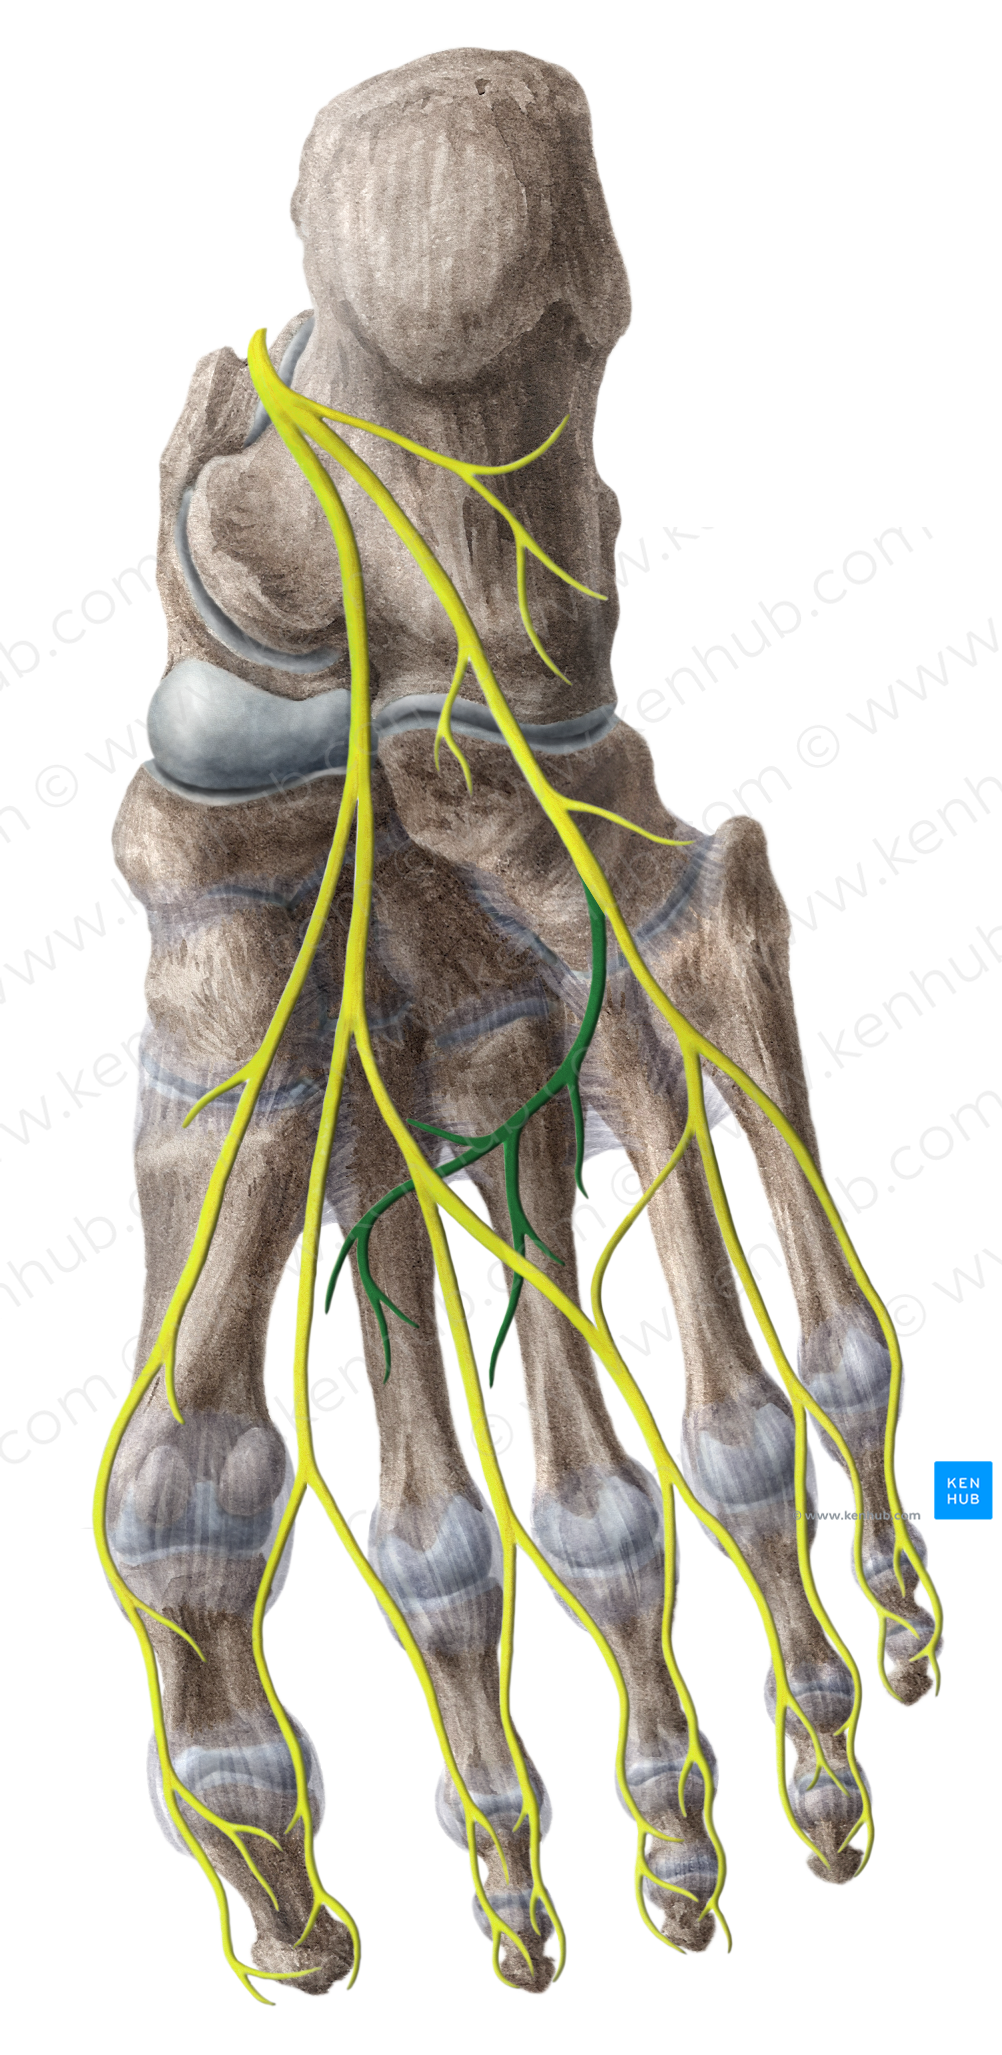 Deep branch of lateral plantar nerve (#8786)